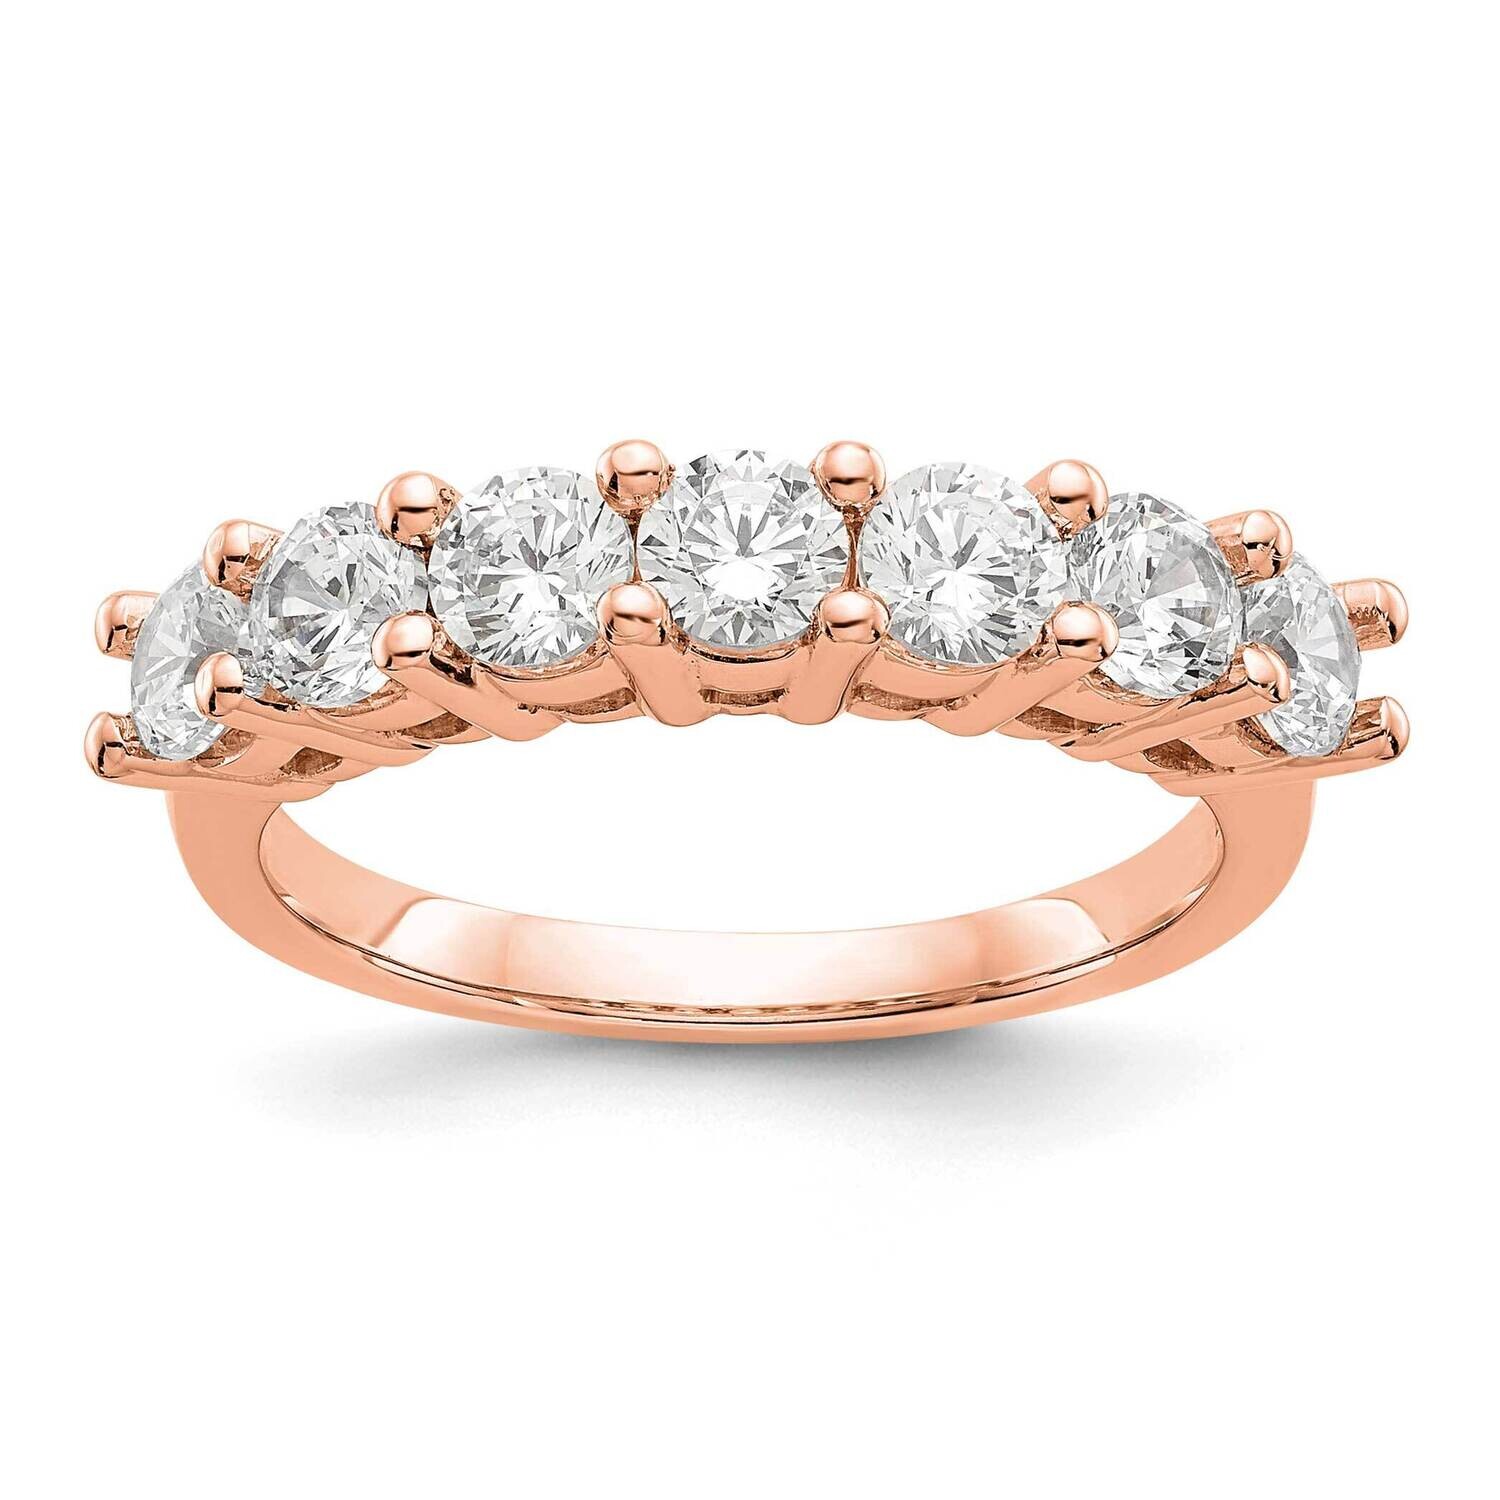 7-Stone Shared Prong Holds 7-3.3mm Round Diamond Band Ring Mounting 14k Rose Gold RM3295B-105-RAA